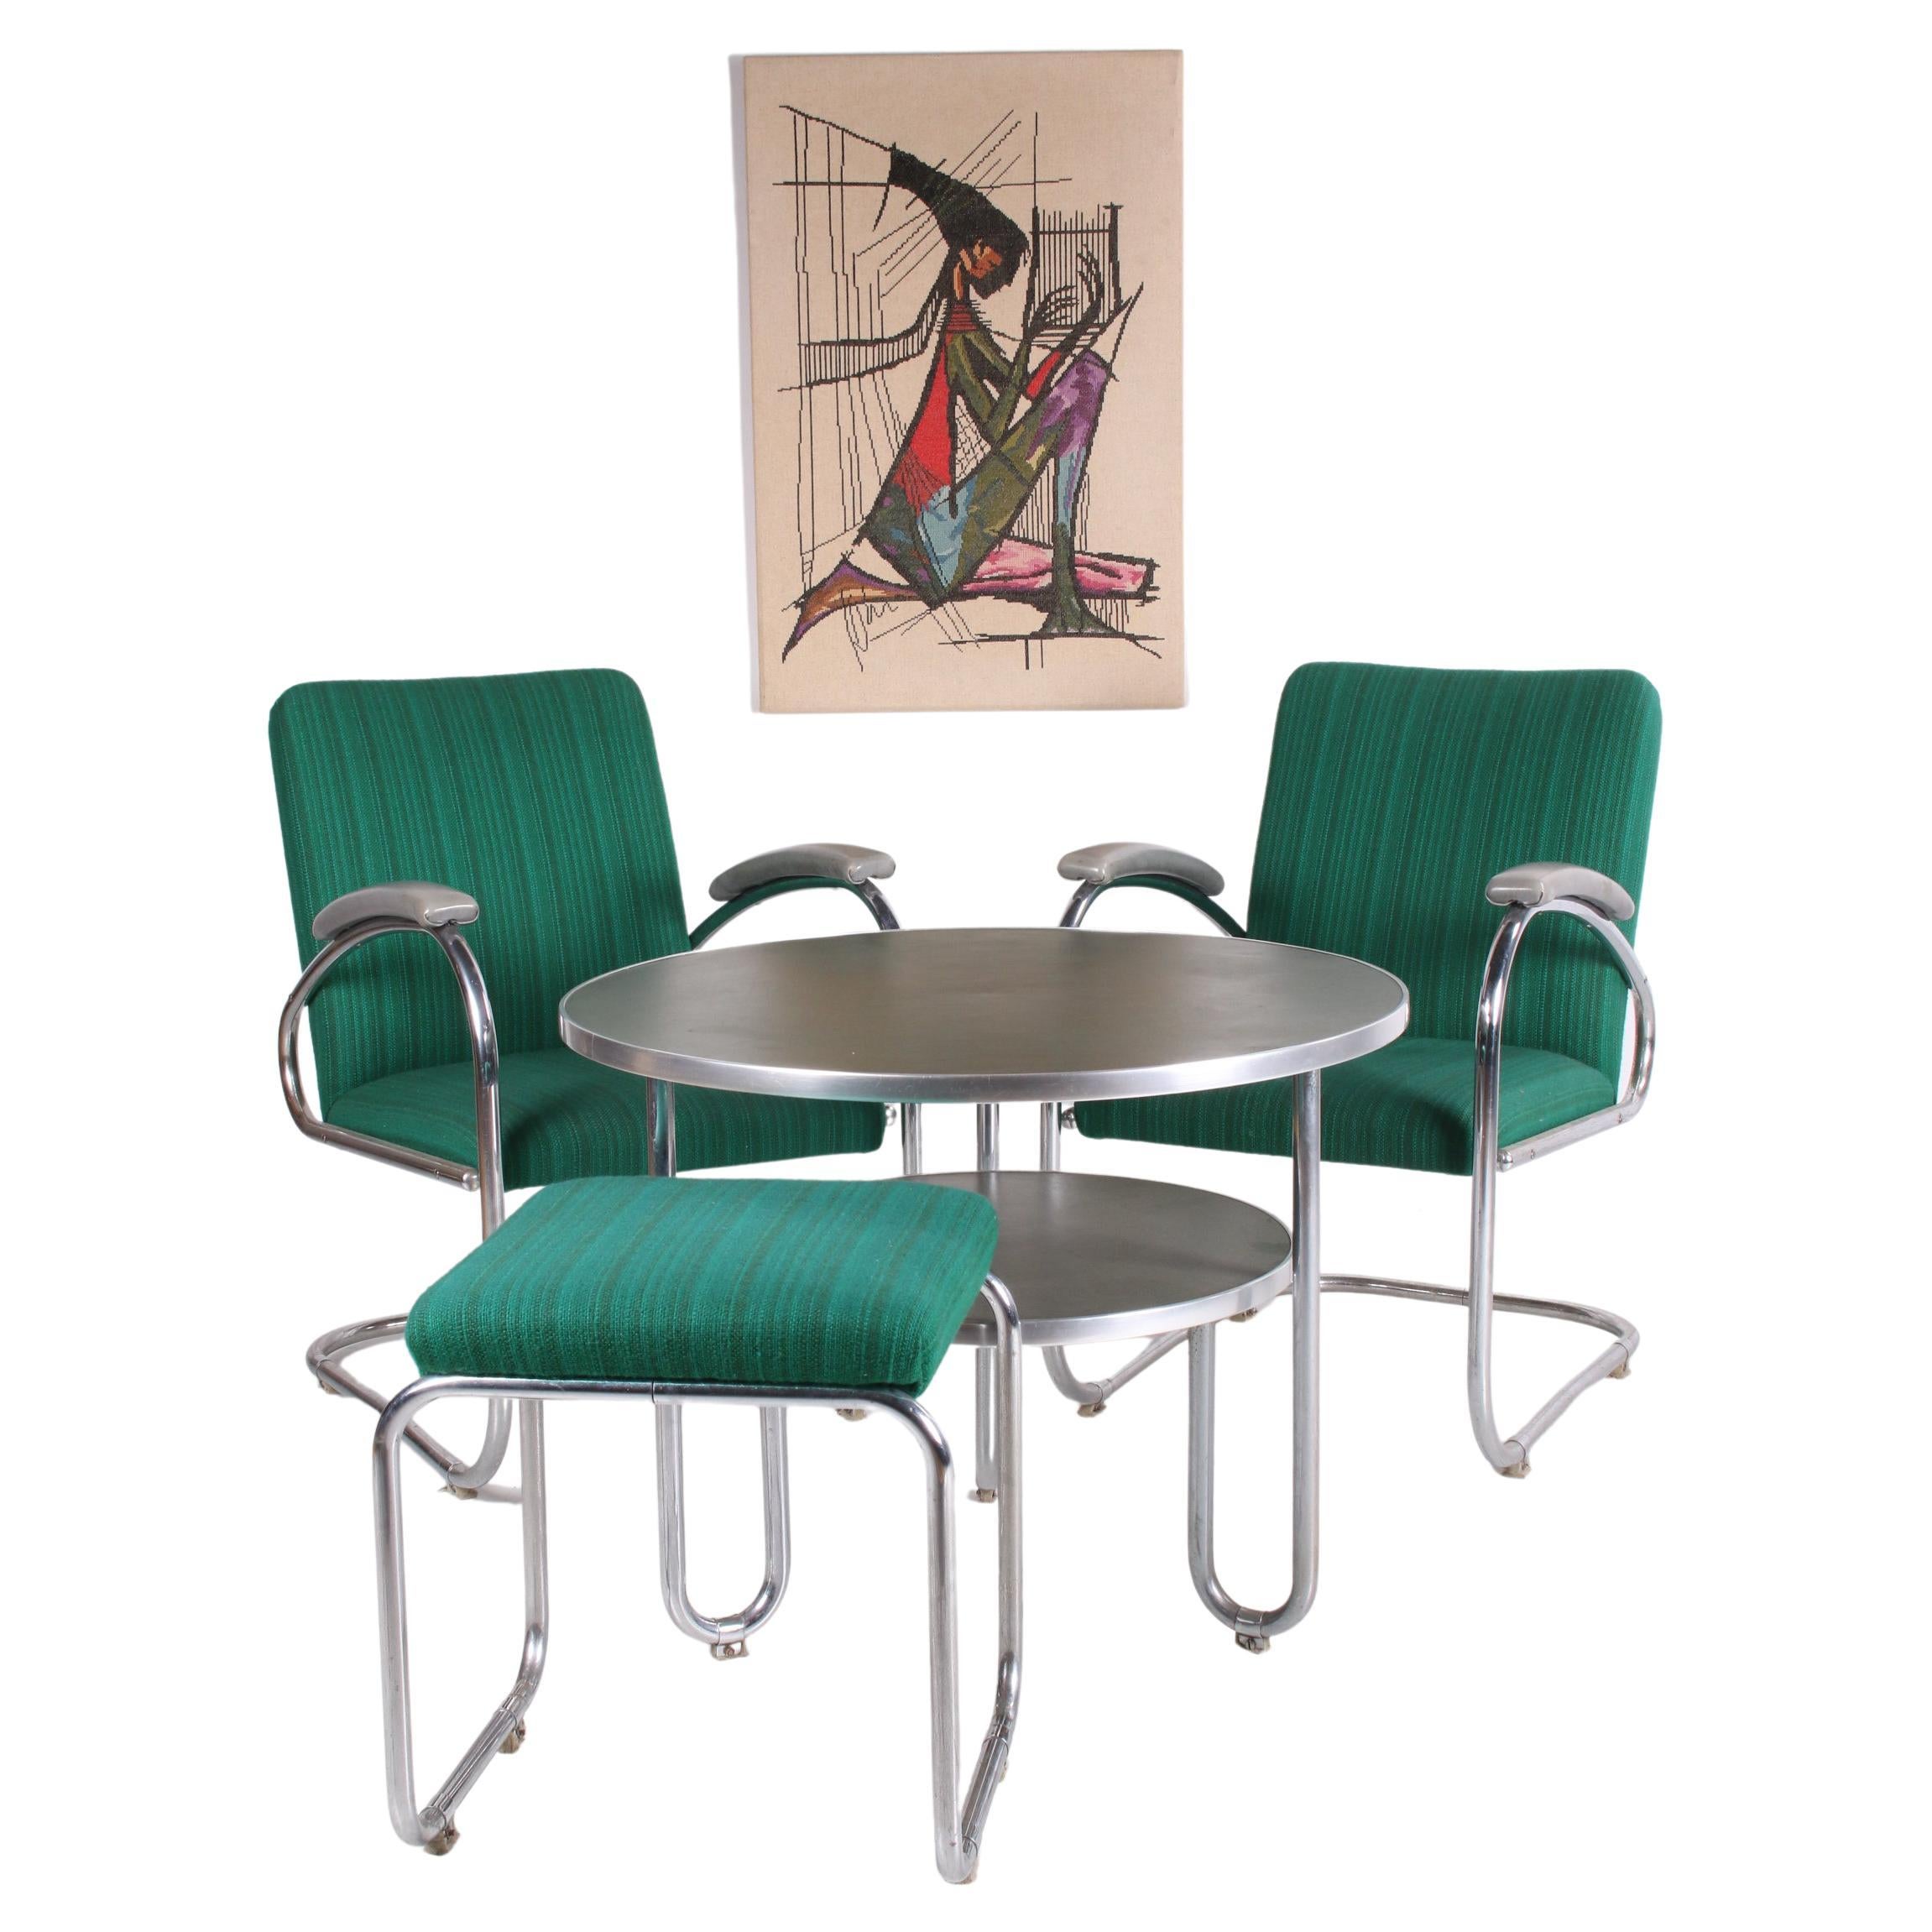 Bauhaus Armchairs Bridge with Table and Footstool Made by Mauser, Germany